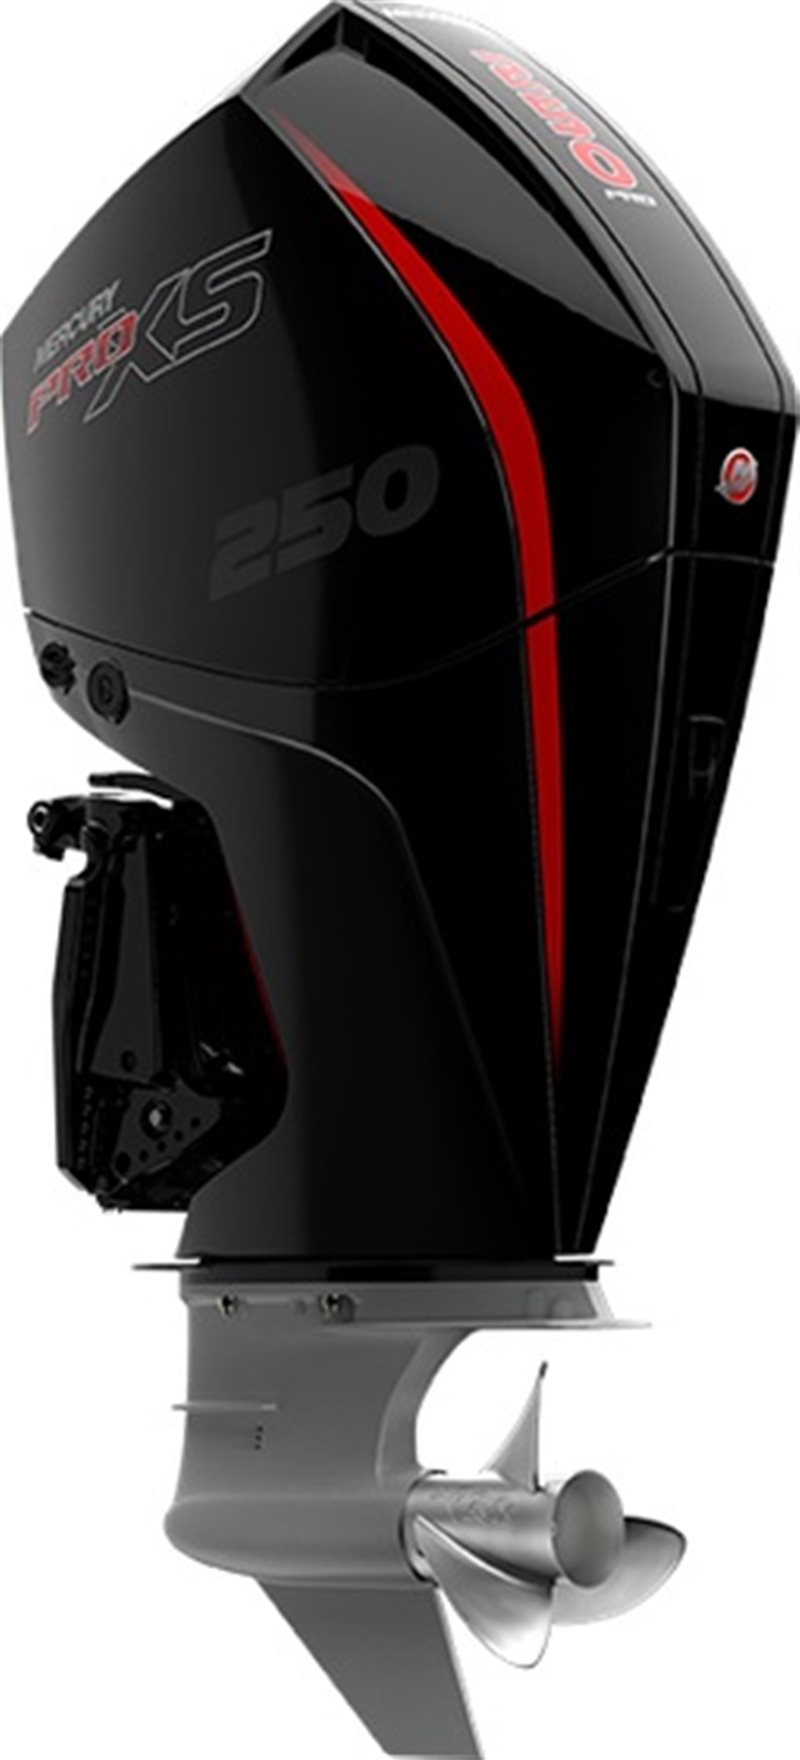 2021 Mercury Outboard Pro XS 175 - 300 Pro XS 250 at Fort Fremont Marine